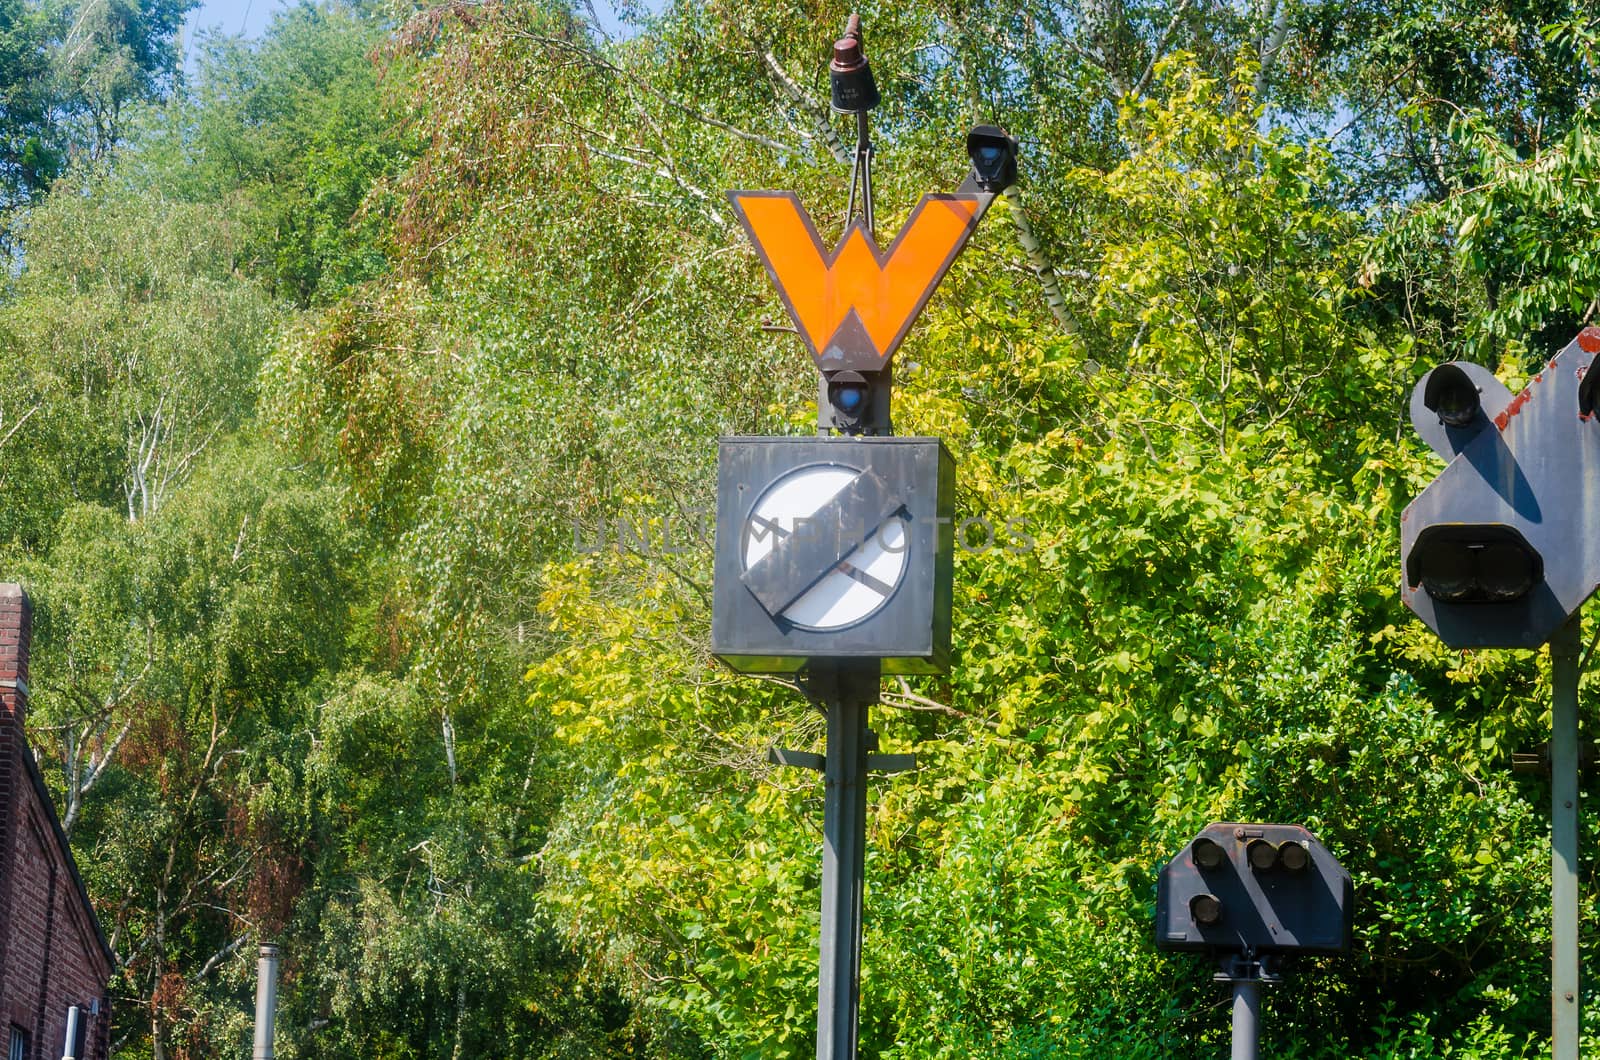 Old railway signal. The signals regulate visually, acoustically or electronically rail transport.